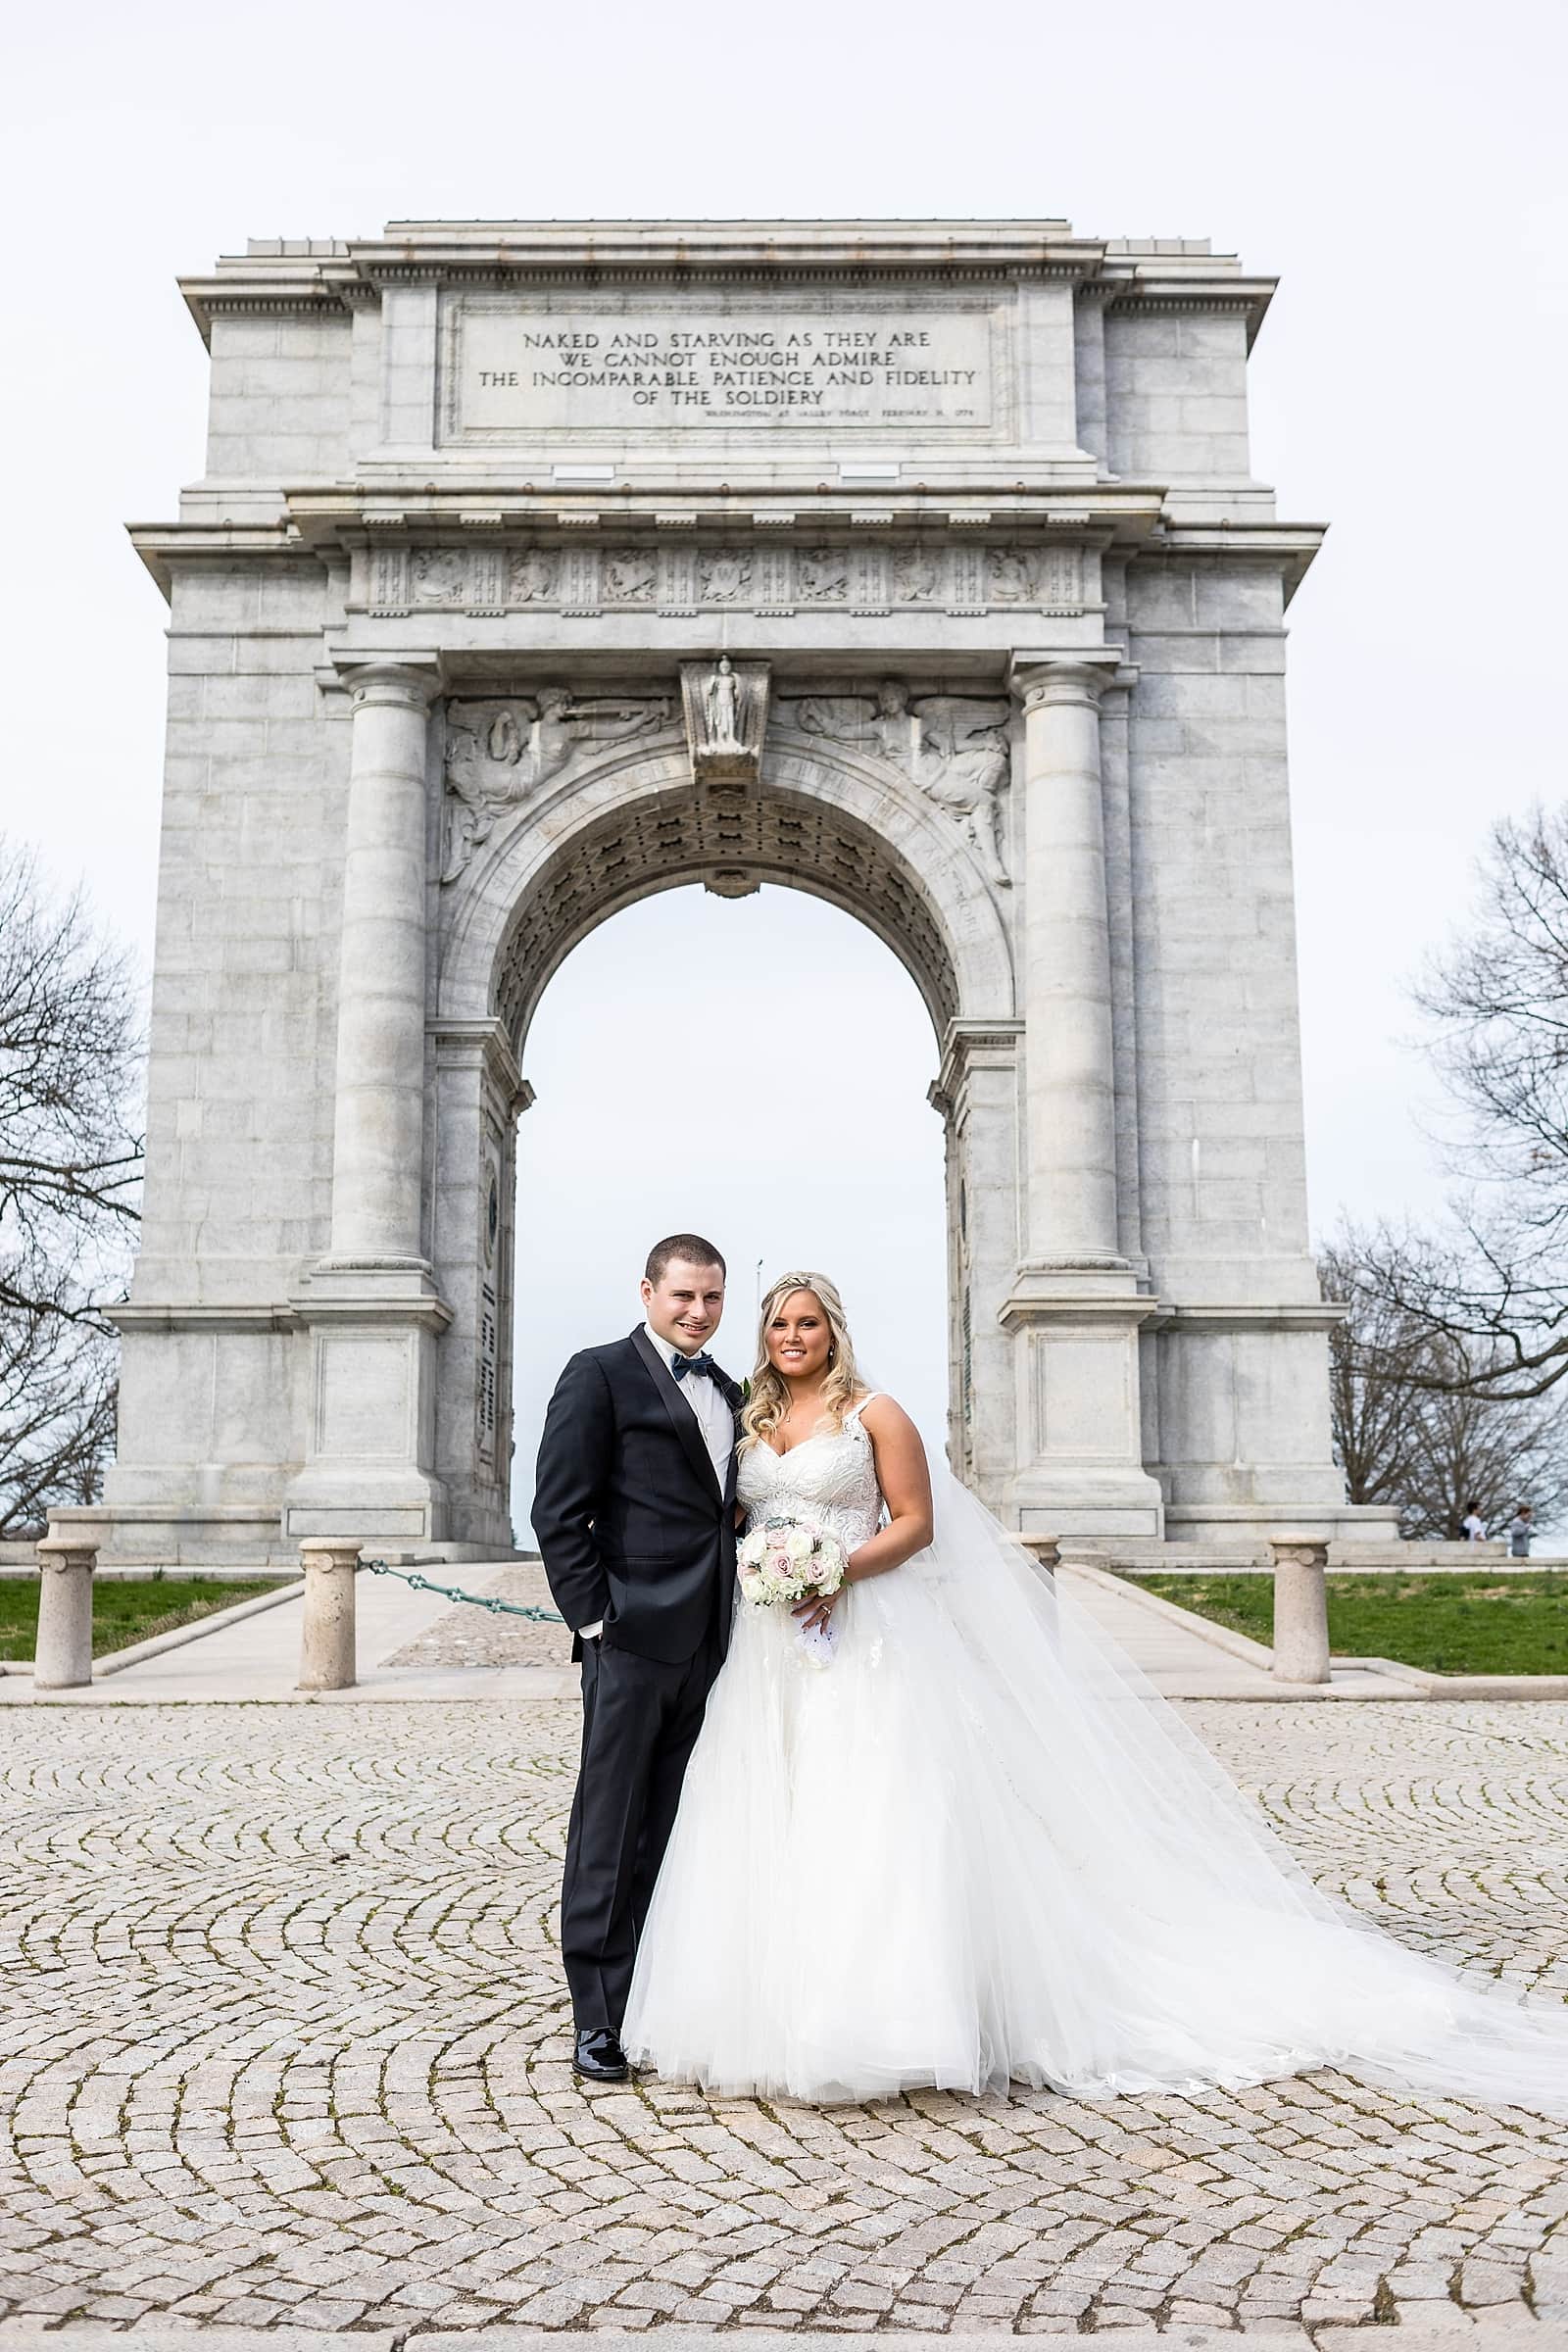 Bride & Groom wedding portraits at the memorial arch in Valley Forge National Park.